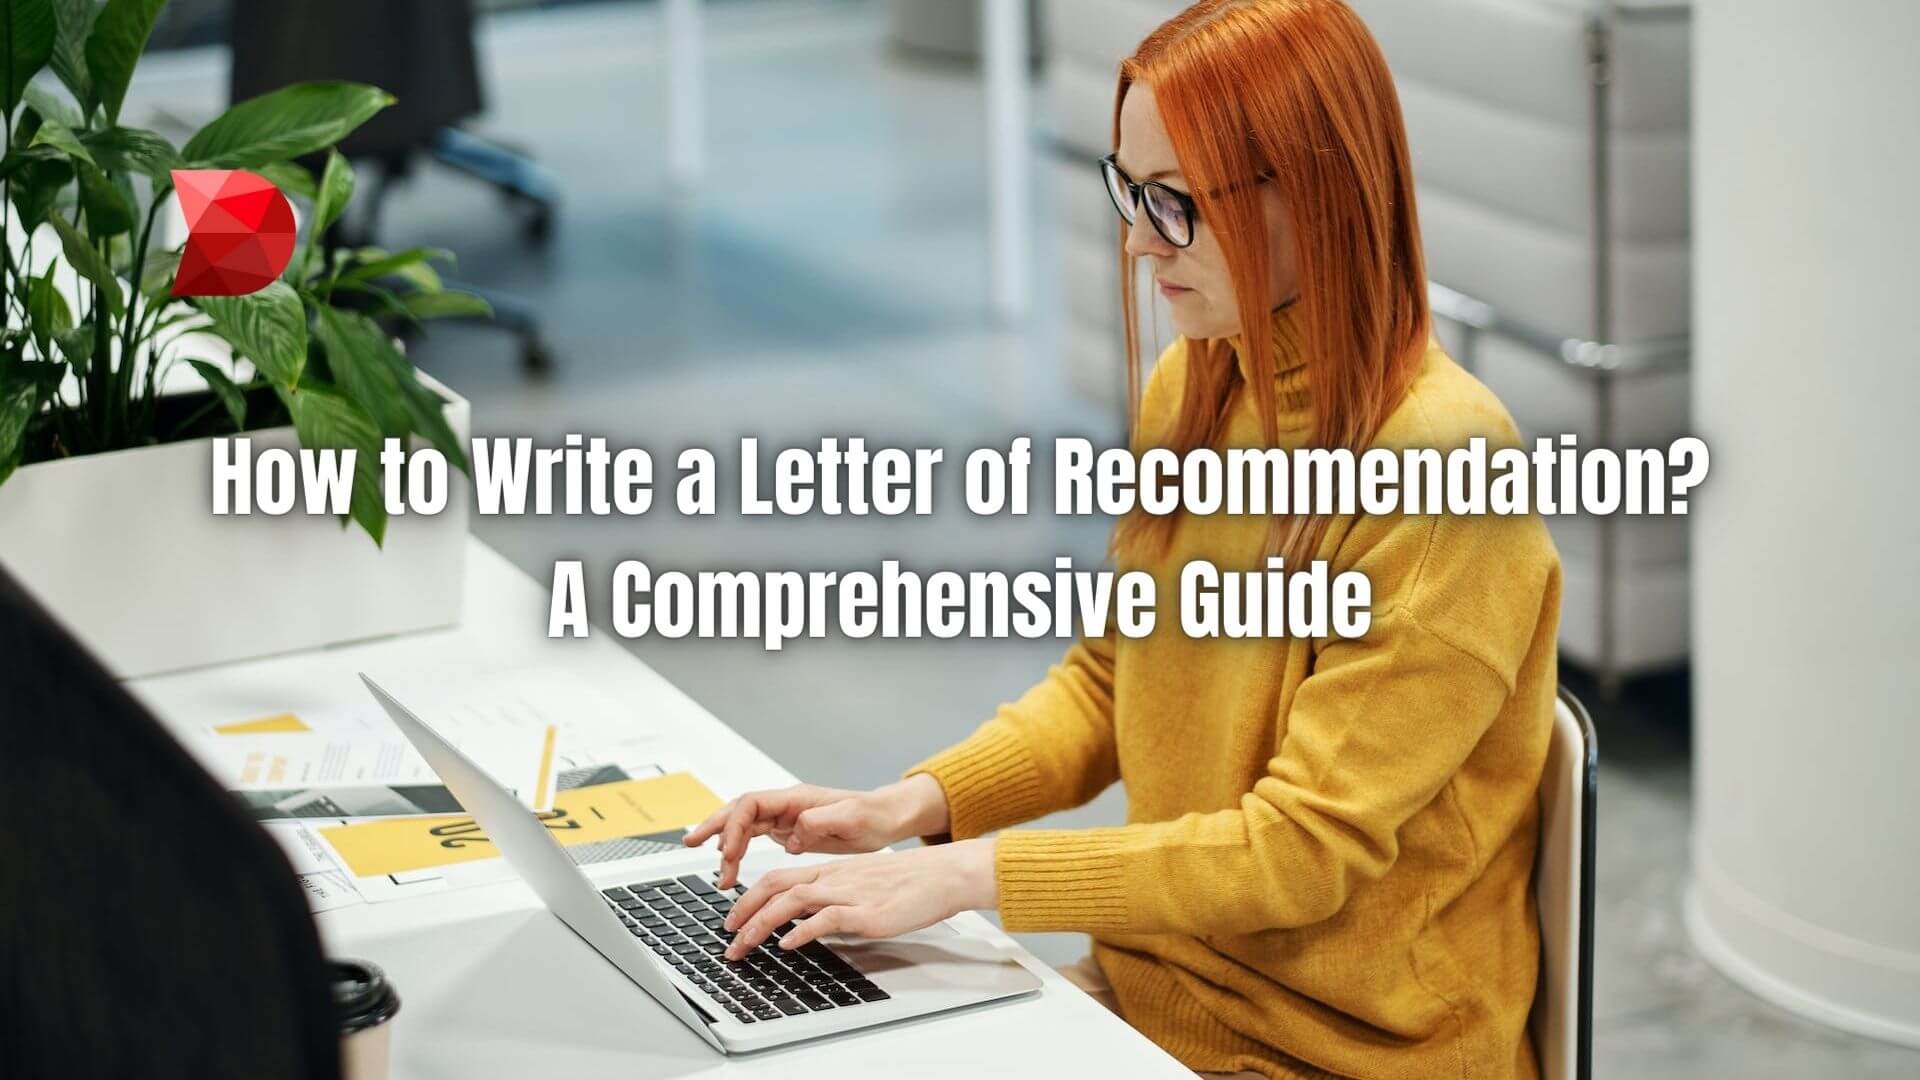 Empower your recommendation writing skills! Here's a step-by-step guide for you to learn how to write an effective letter of recommendation.